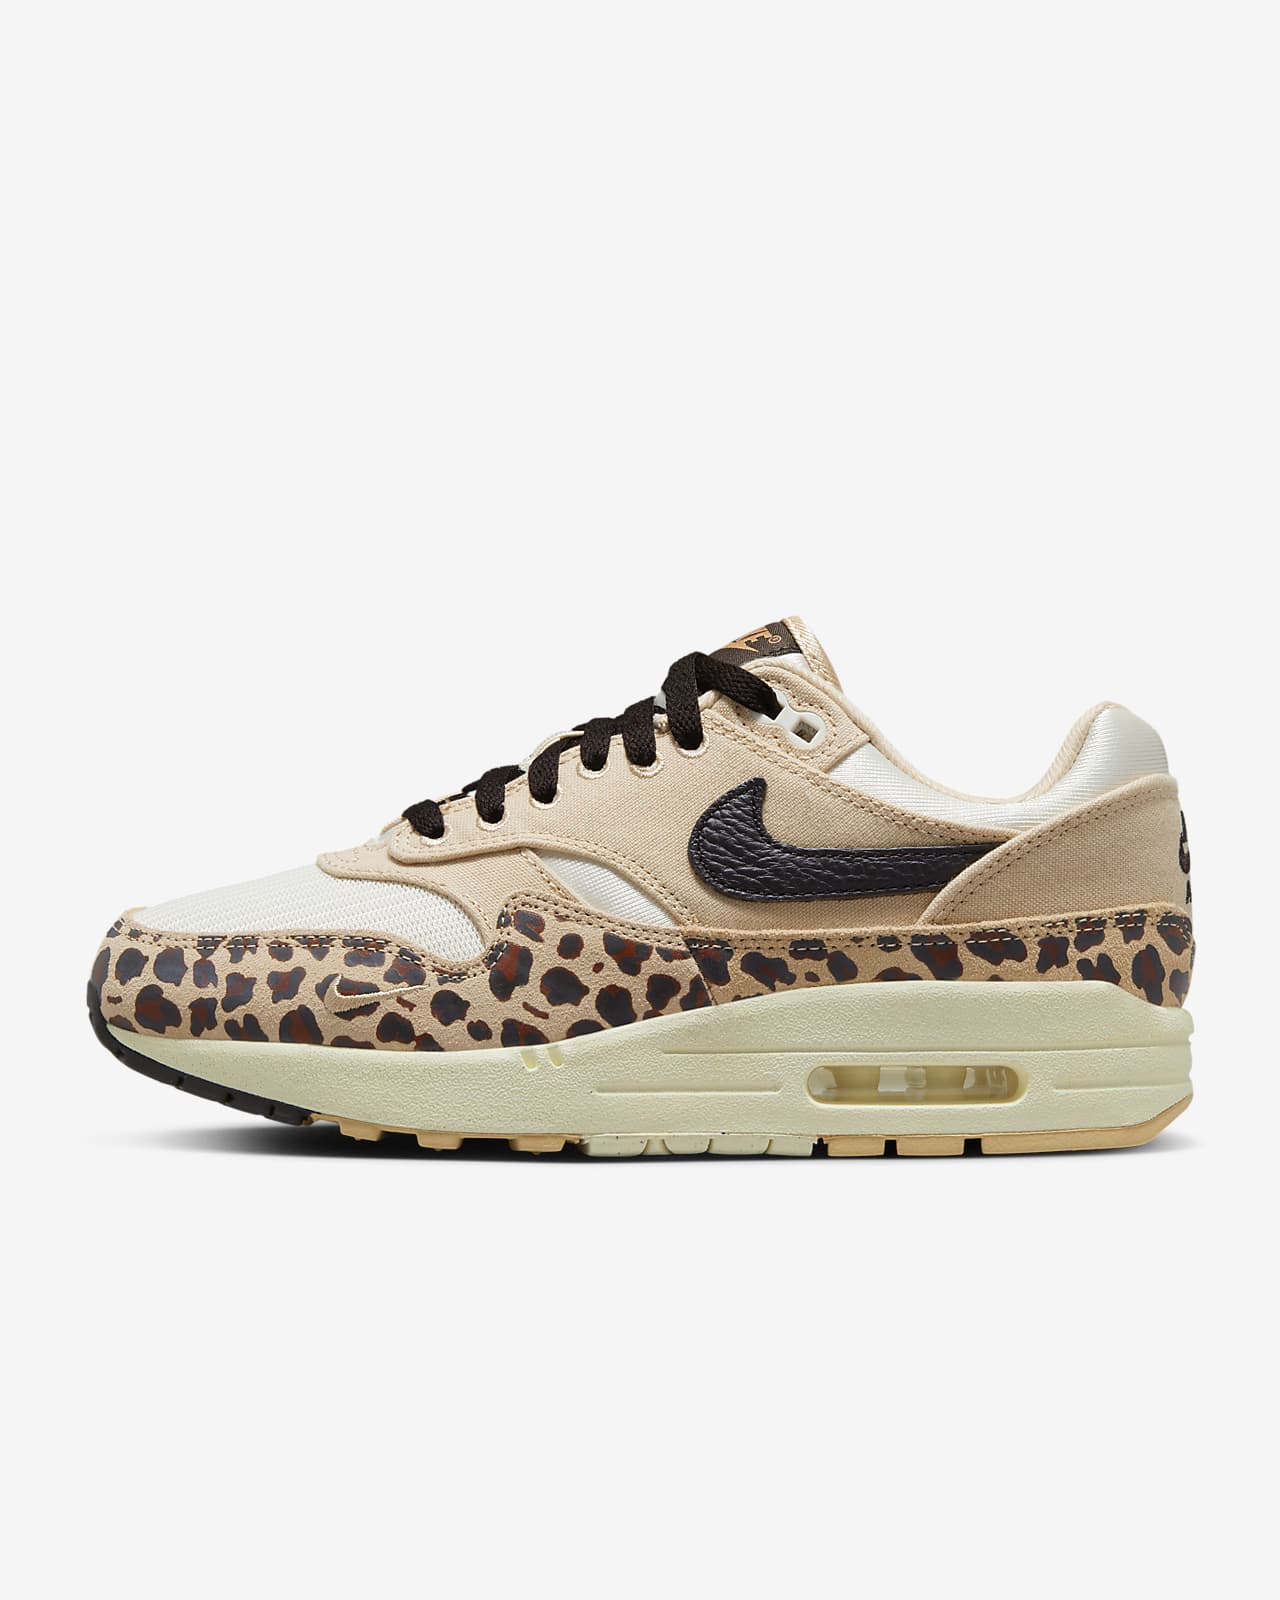 Nike Air Max 90 in Neon Green with Leopard Print